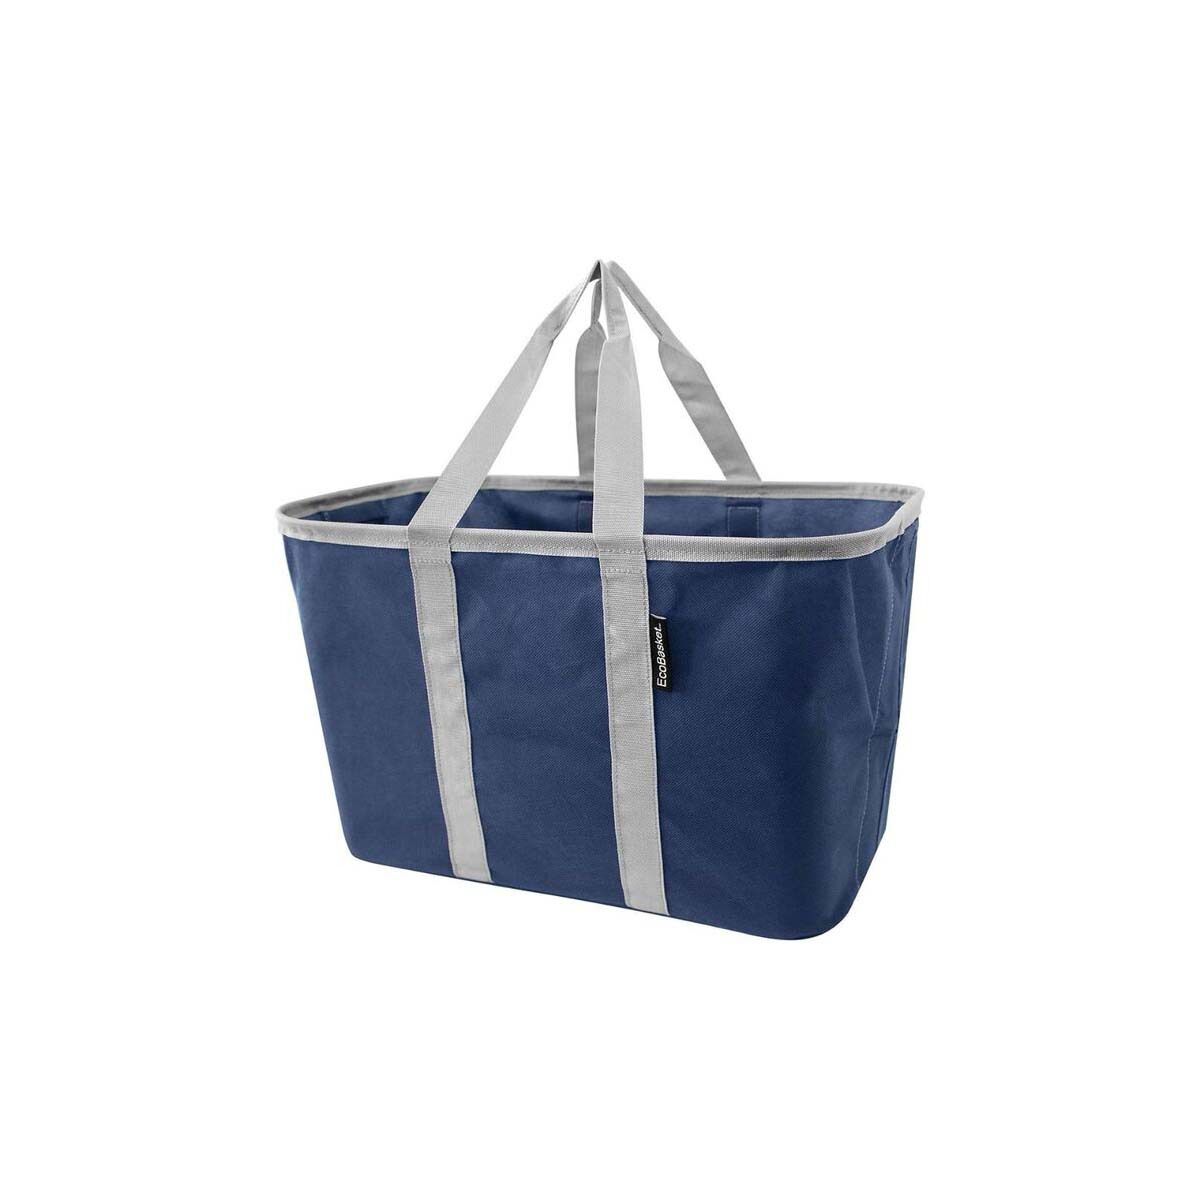 Clevermade Collapsible Eco Basket 20L, , bcf_hi-res